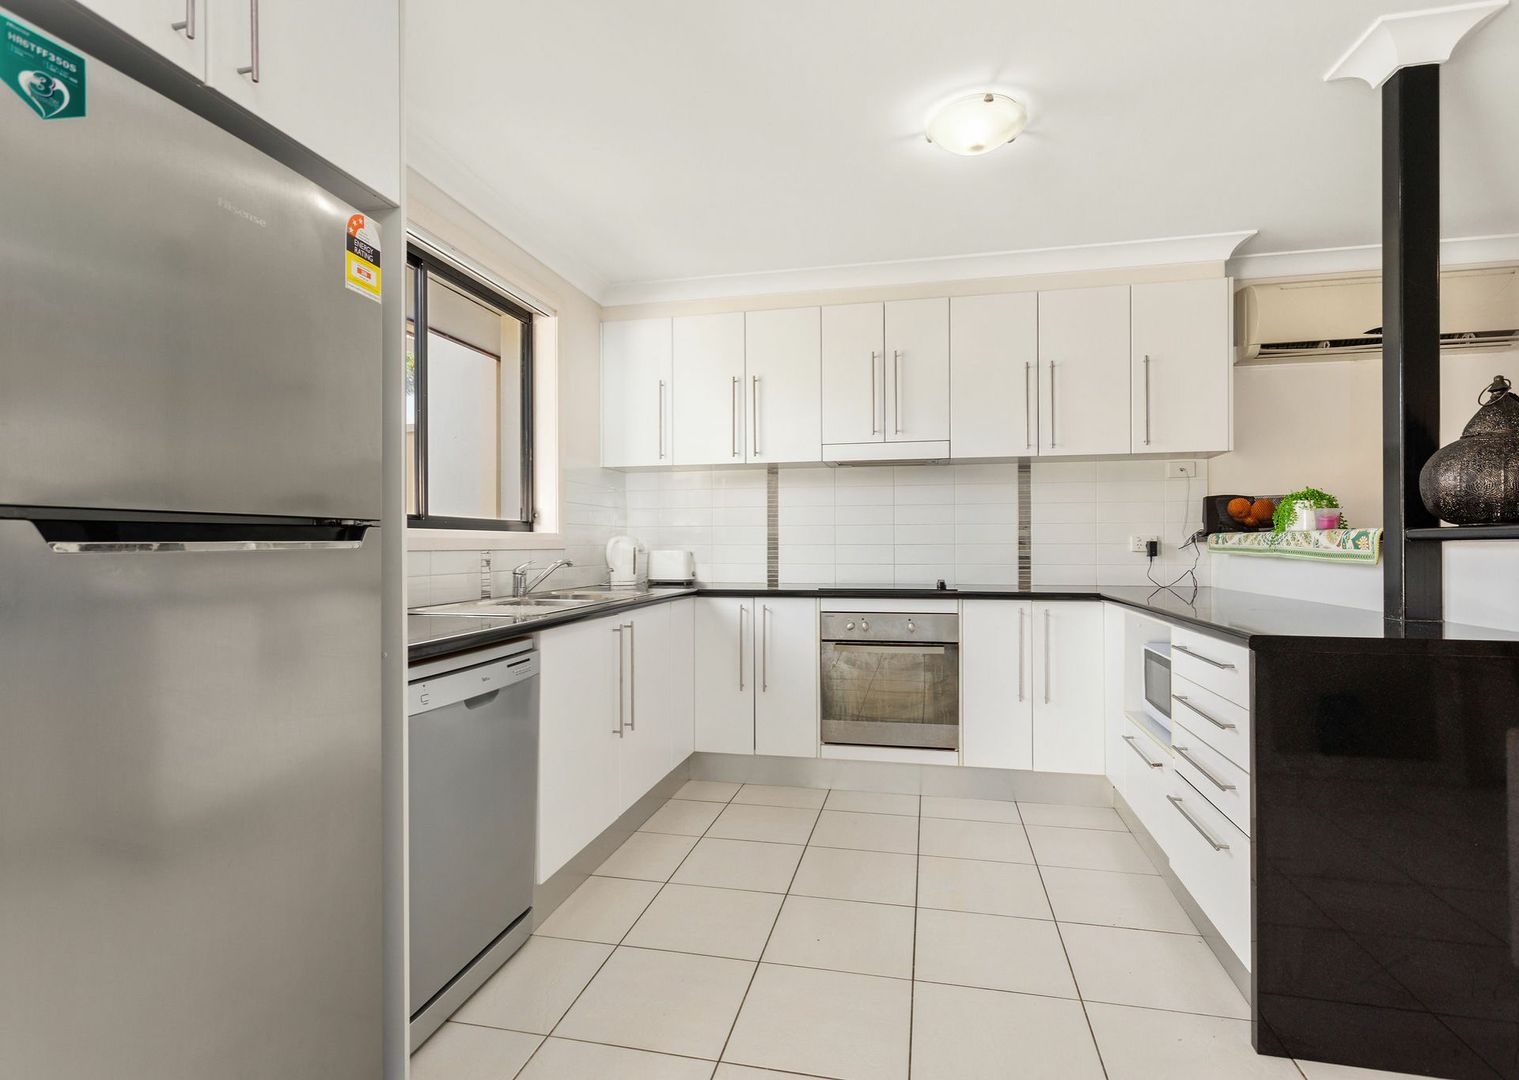 2/1 Connell Street, Old Bar NSW 2430, Image 1